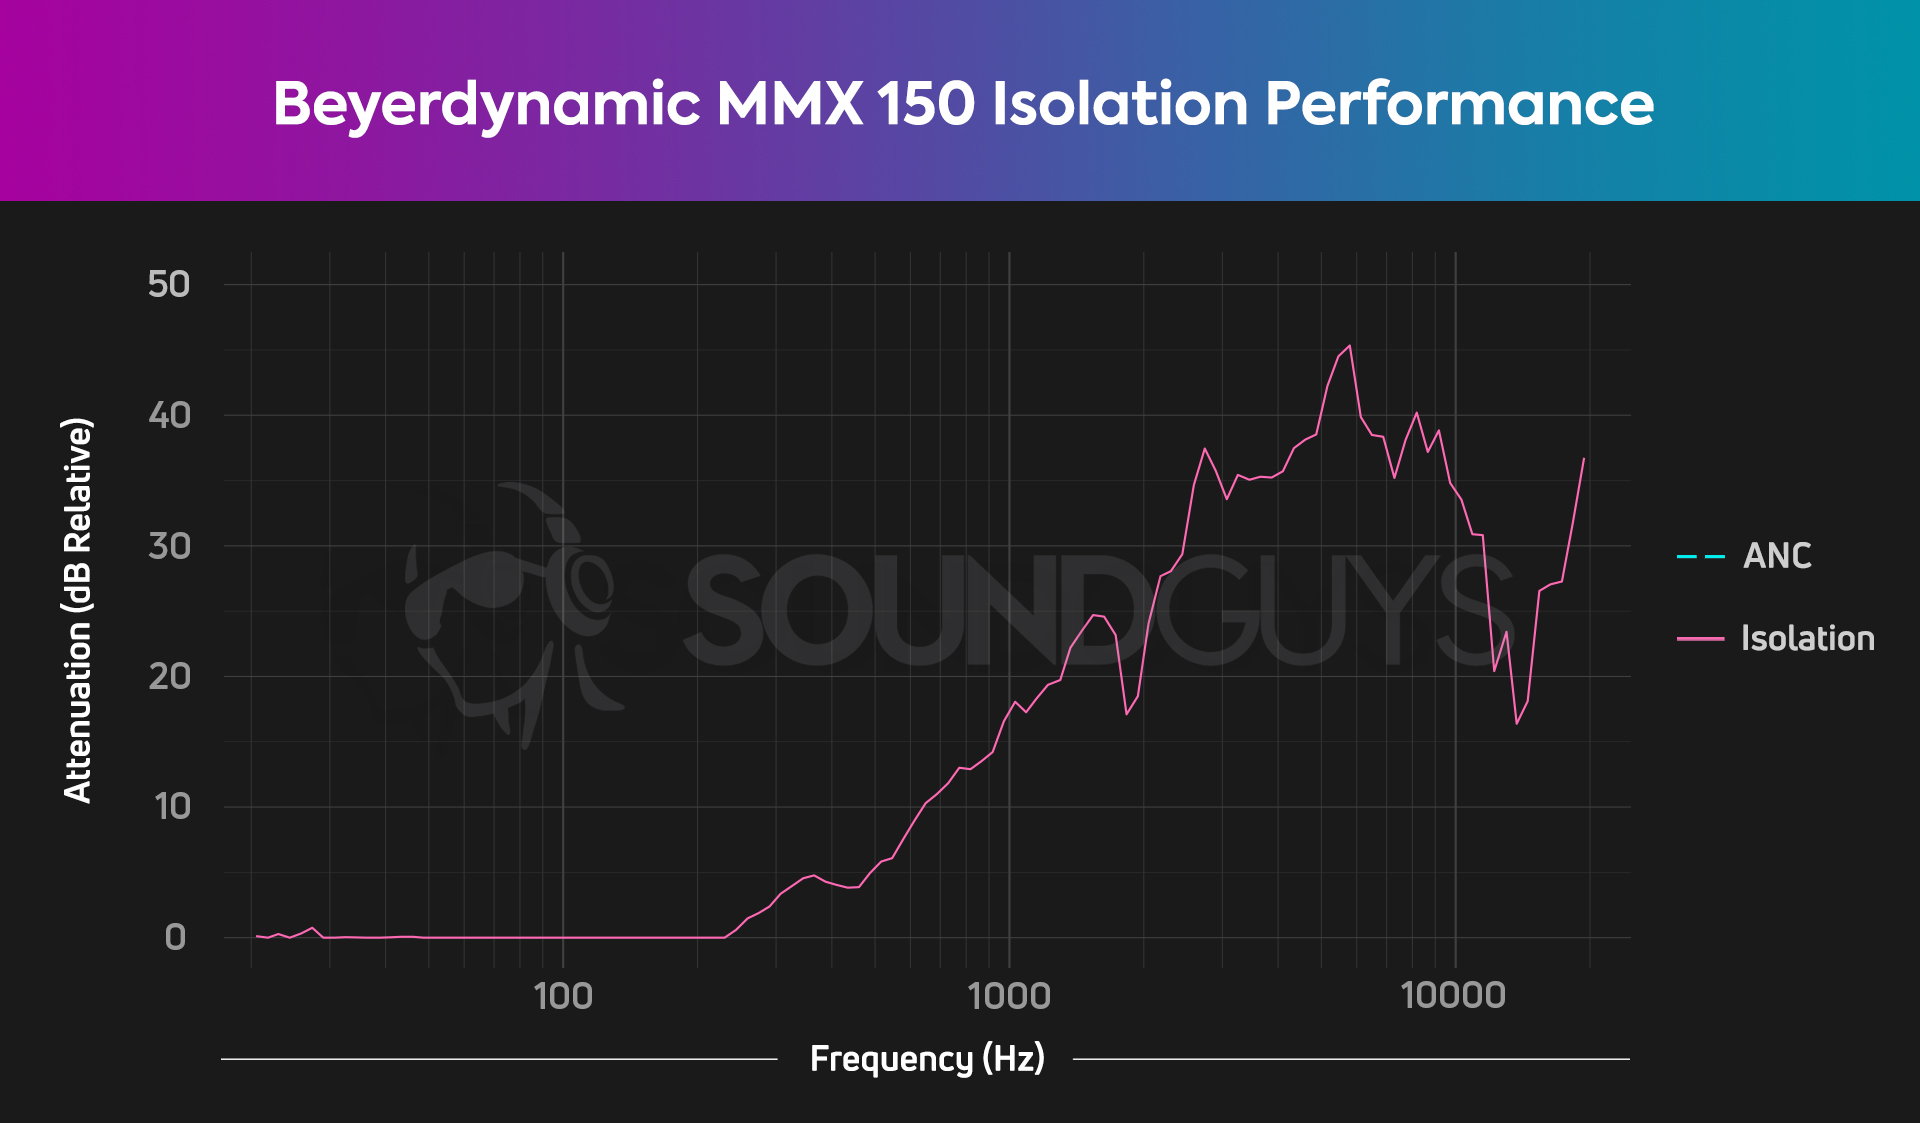 An isolation chart for the Beyerdynamic MMX 150 gaming headset, which shows decent isolation for a pair of over ear headphones.